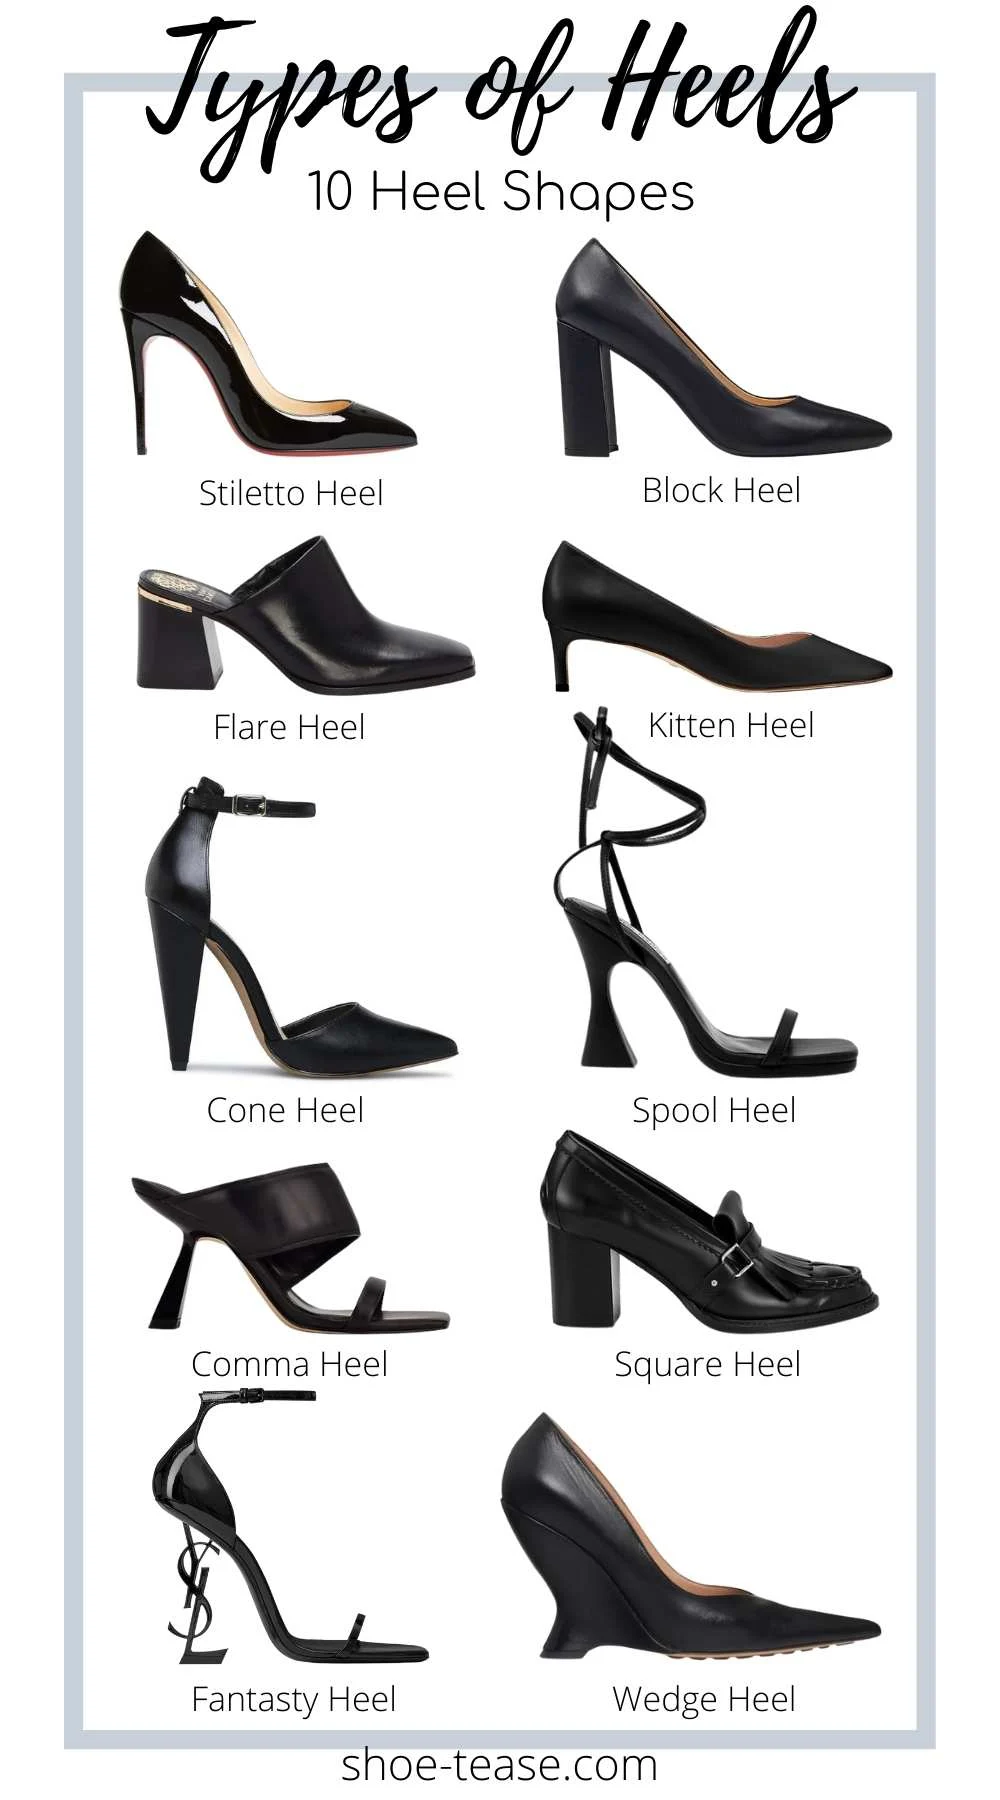 What is the point of heels, when it comes to functionality? - Quora